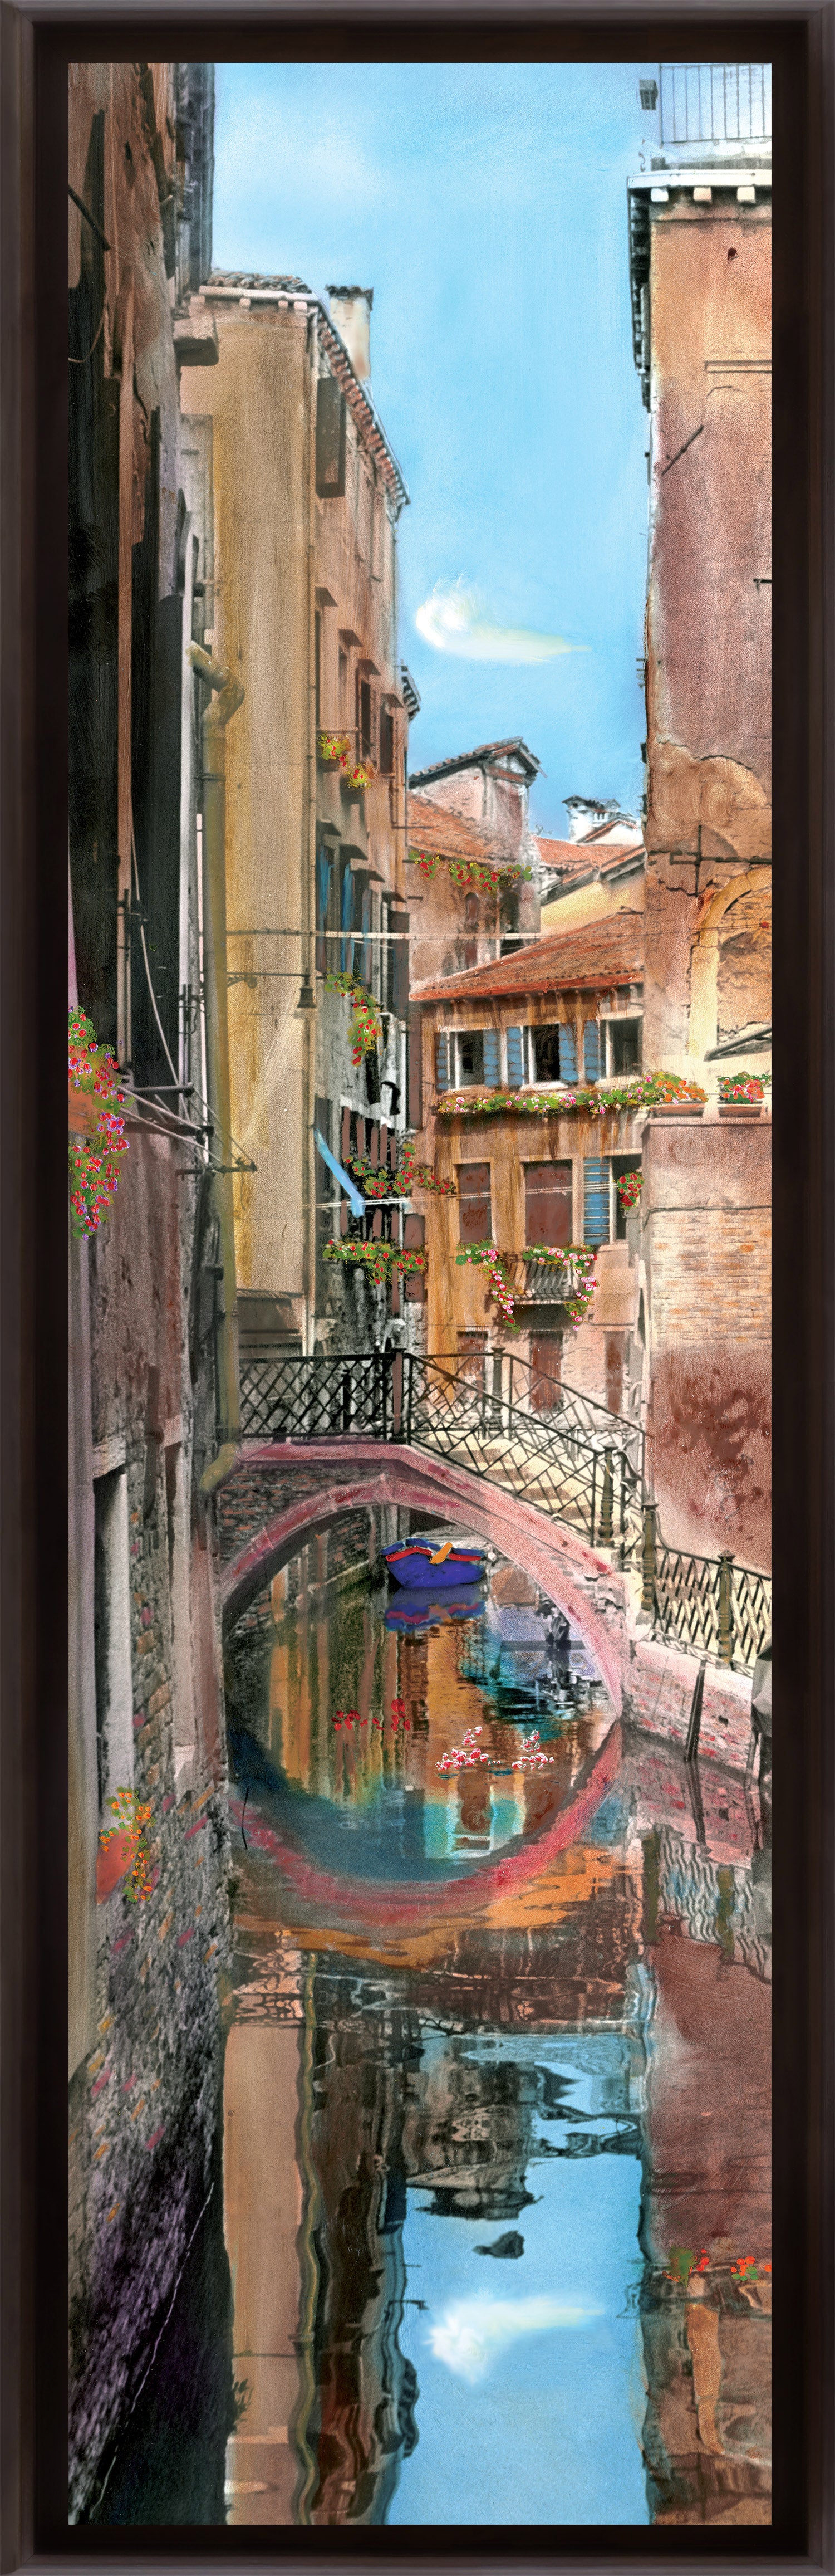 "Textured Canal" TALL SKINNY CANVAS FRAMED PRINT "15 X 45"